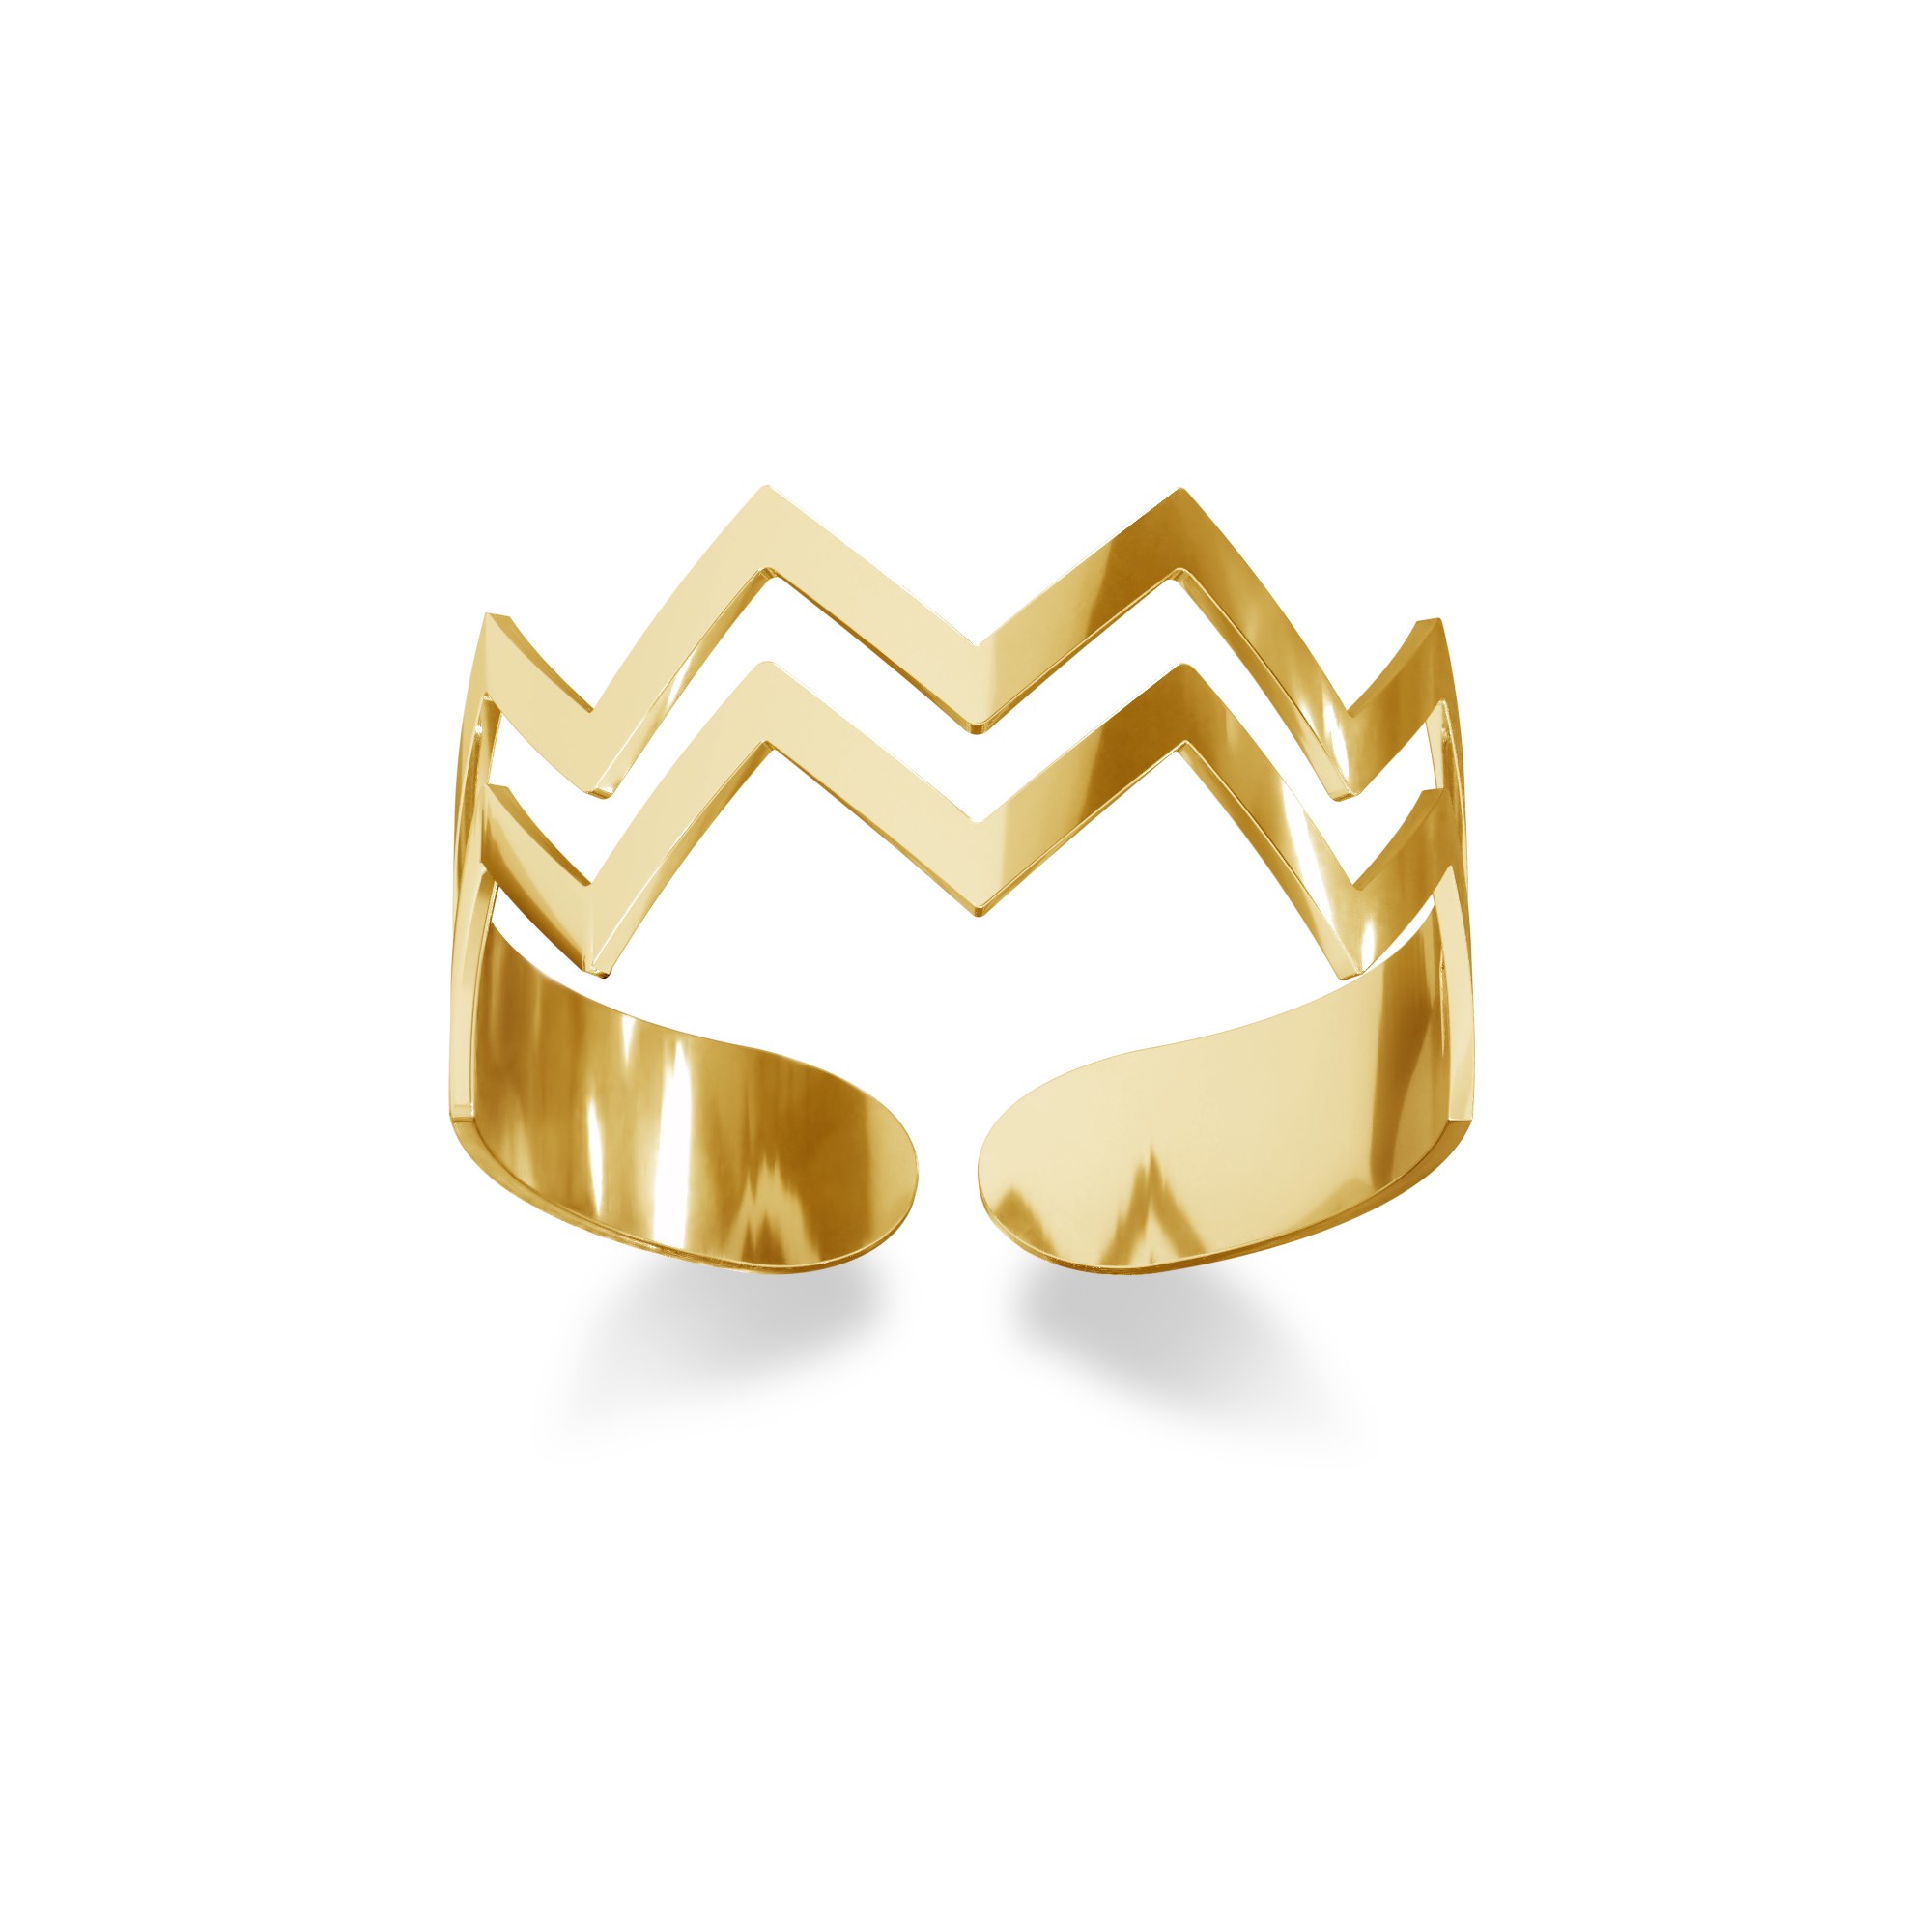 Knuckle ring with a zigzag, sterling silver 925